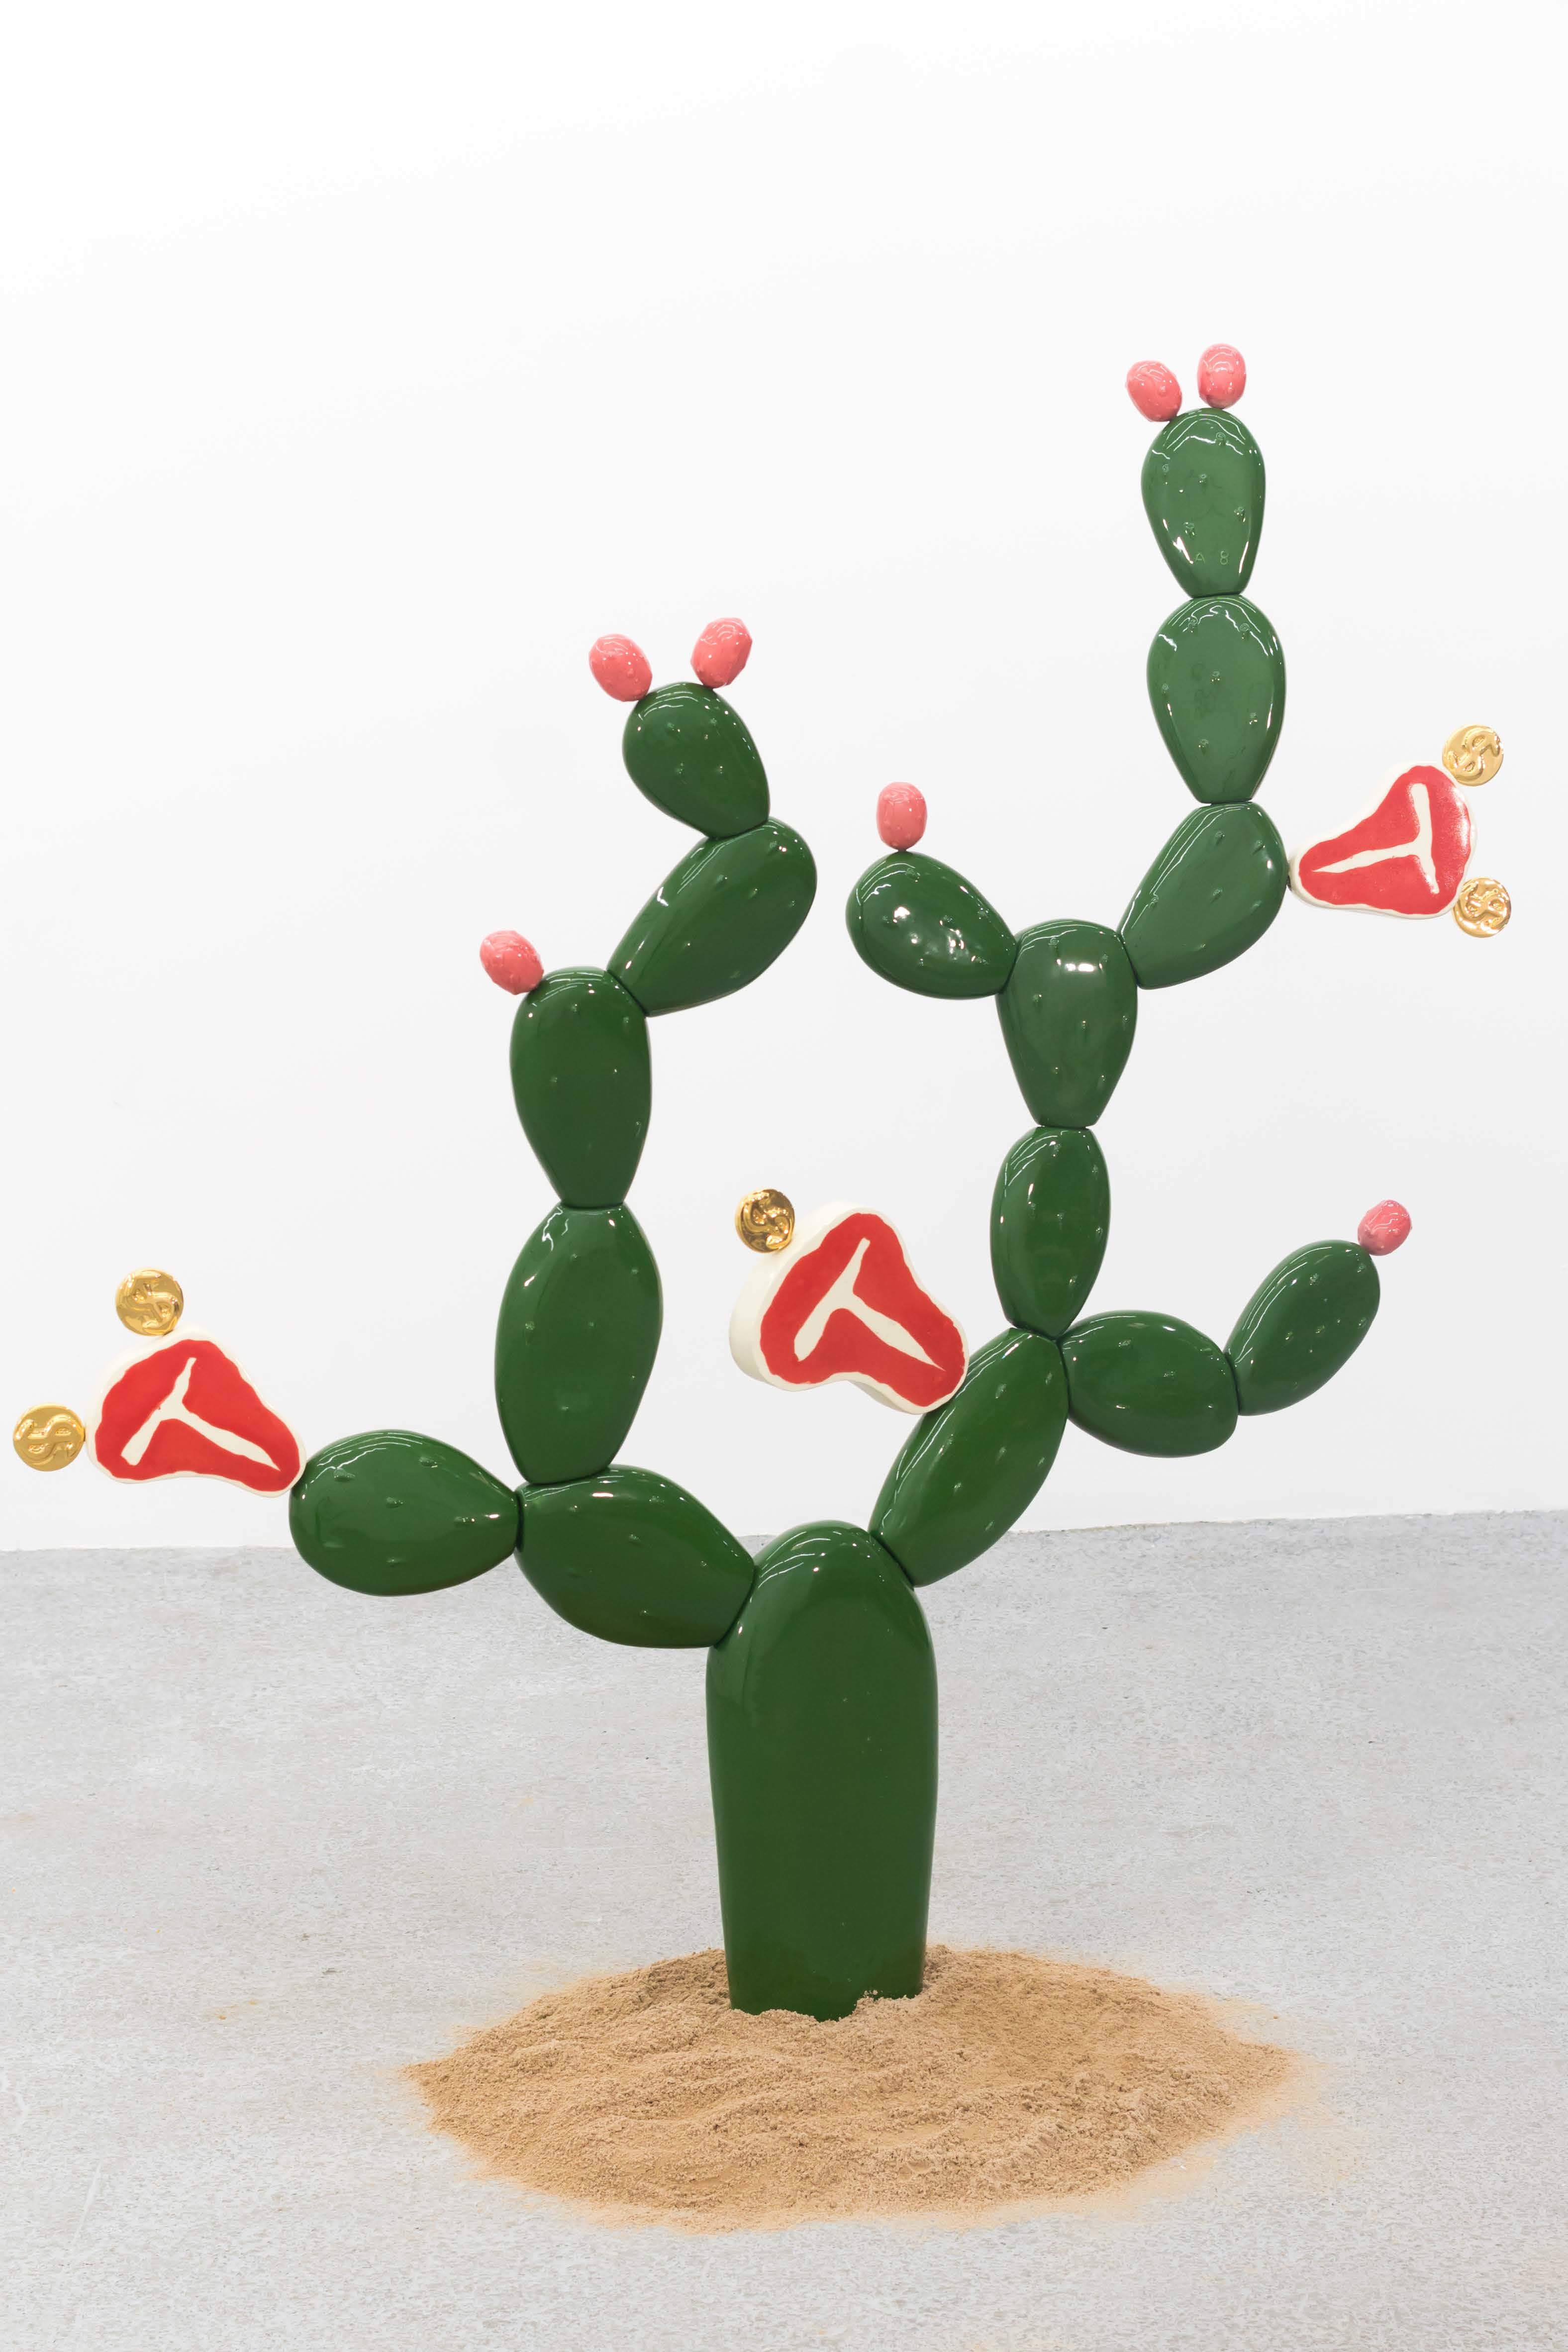 A green cactus sculpture with T-bone steaks as flowers